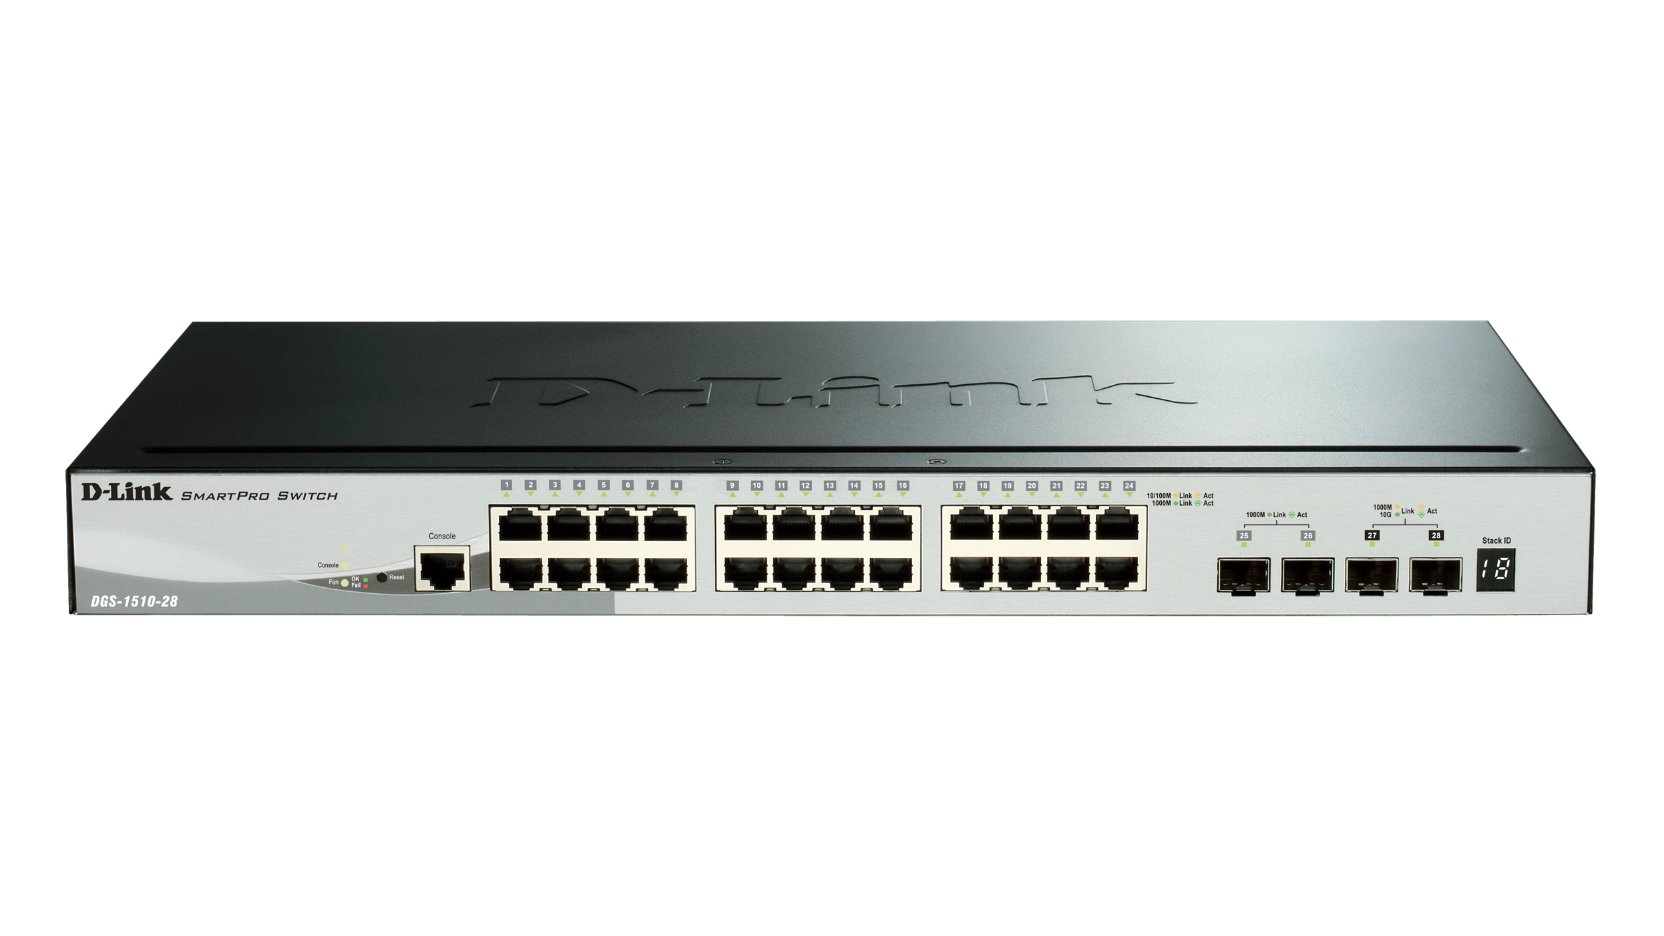 28-Port Gigabit Stackable Smart Managed Switch including 2 10G SFP+ and 2 SFP ports